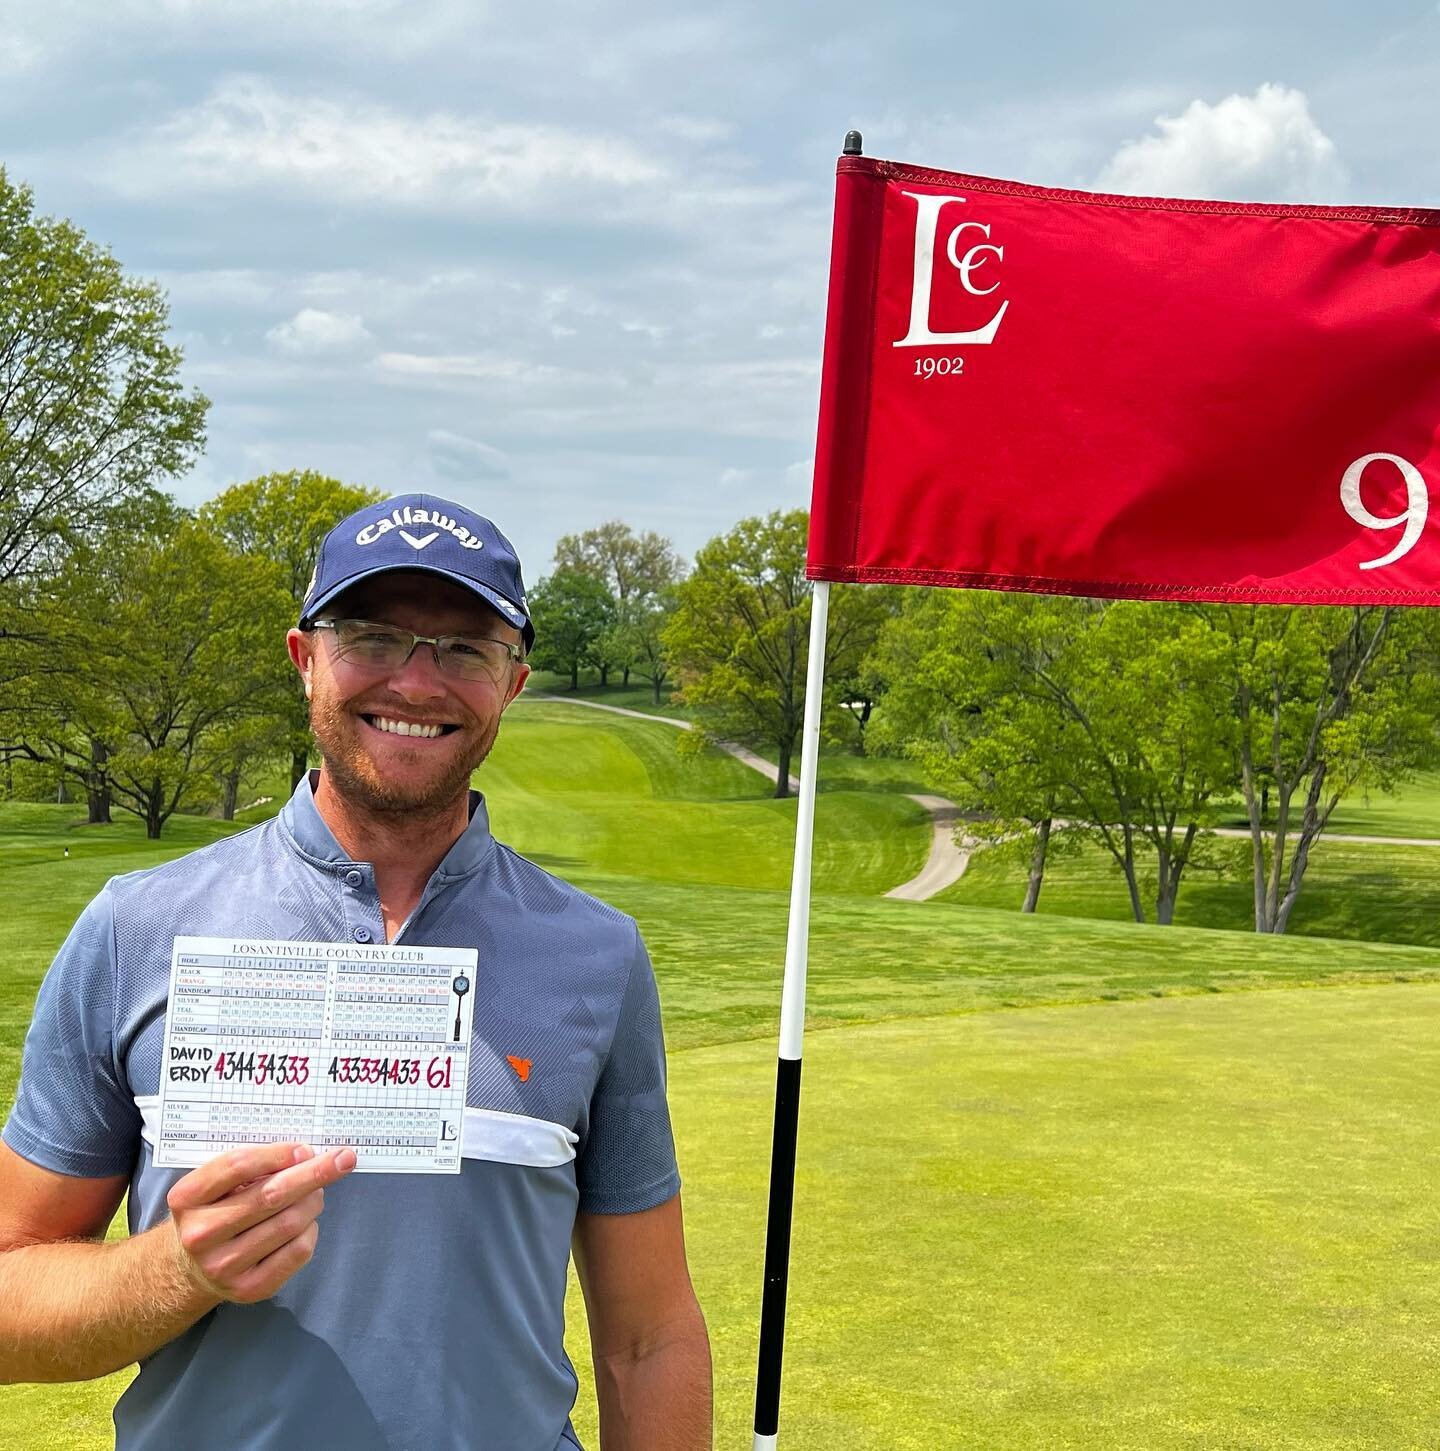 What a day! 62 was the previous course record held by none other than Byron Nelson. Never thought in my golfing life I&rsquo;d get to say something like that.

#losantivillecountryclub #61 #bryonnelson #golf #goinglow